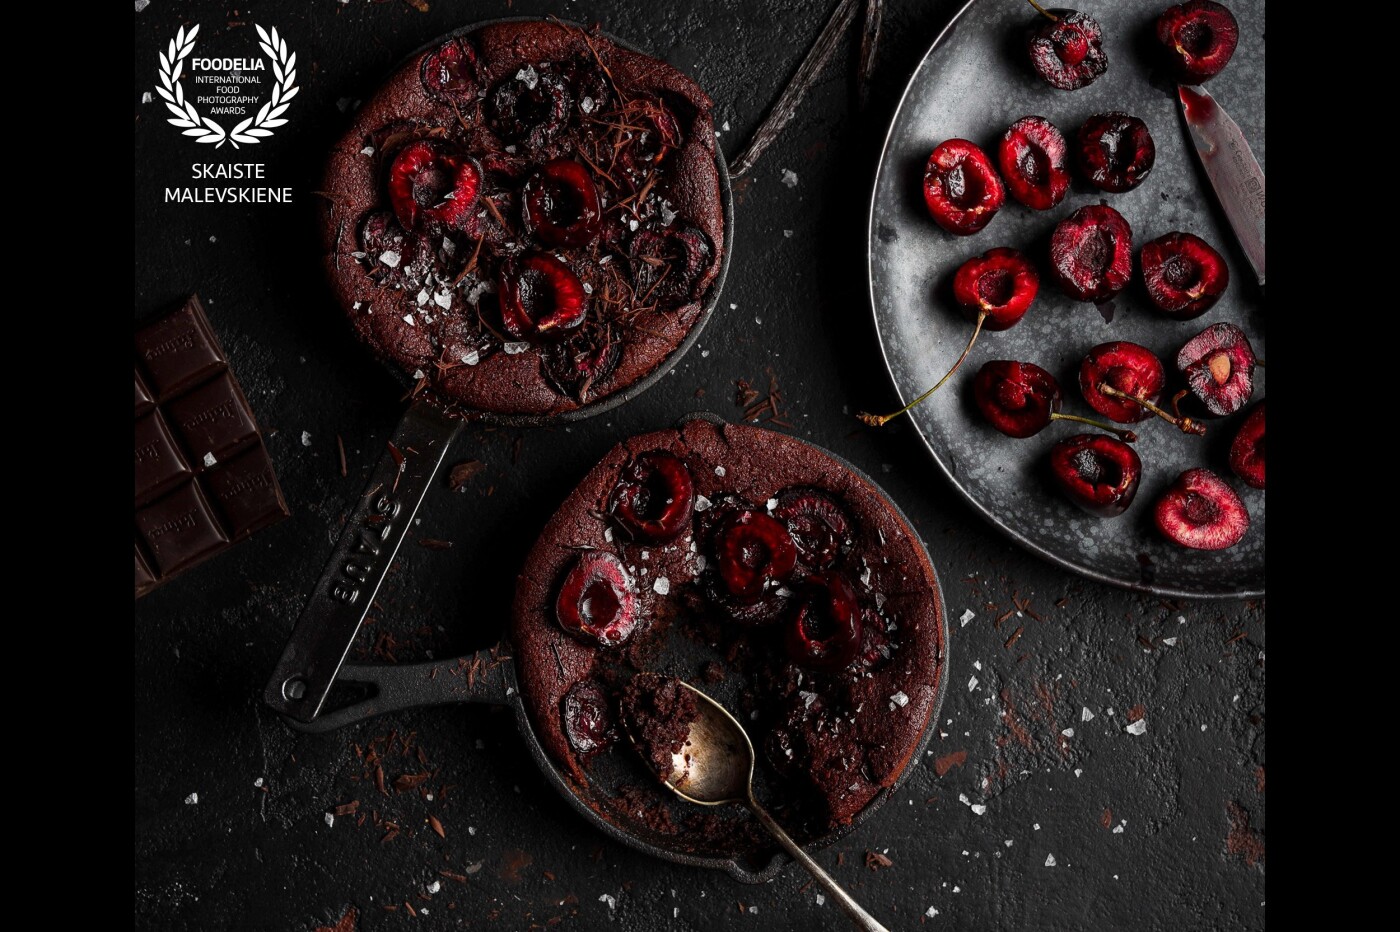 Cherry  Chocolate Clafoutis. There is something magic about cherries and chocolate together. Just wanted to capture this coalition of colors, textures, and tastes. I think this dessert very well catches it all.